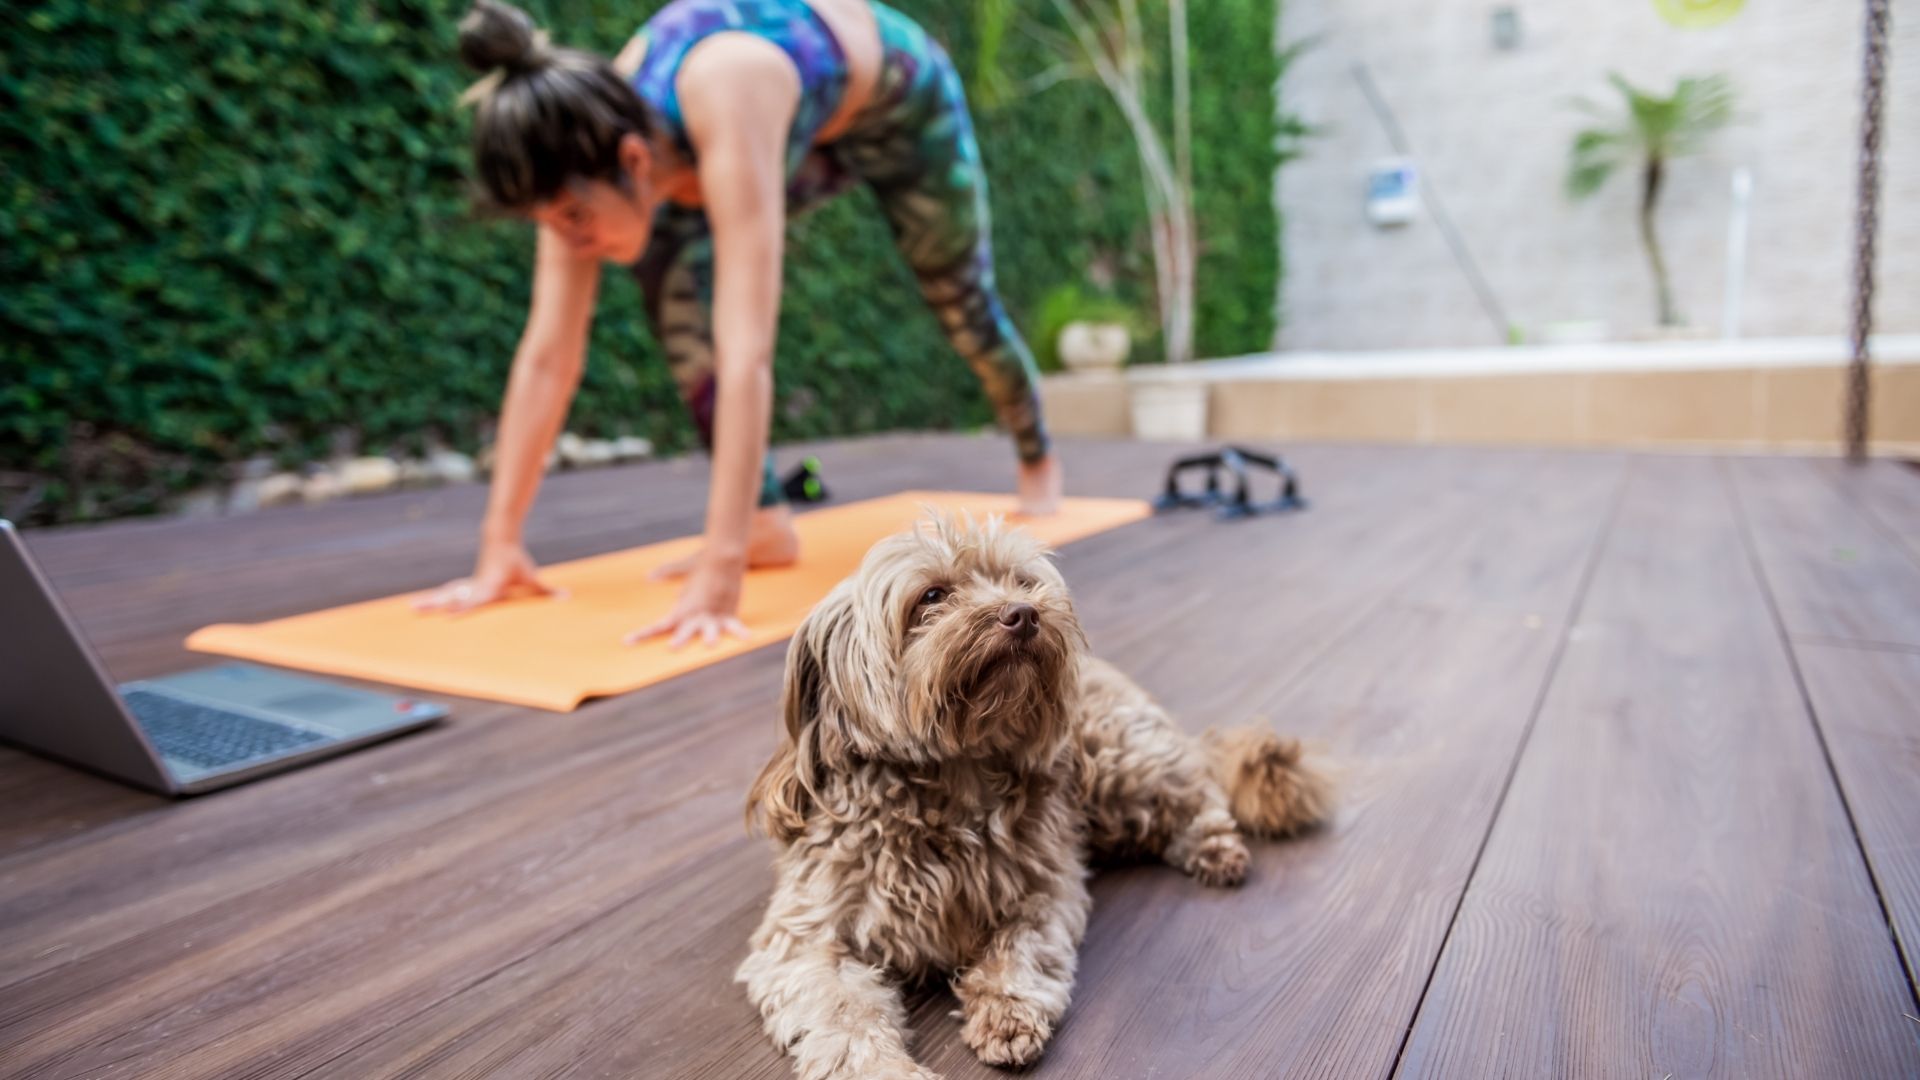 Exercising With Your Dog